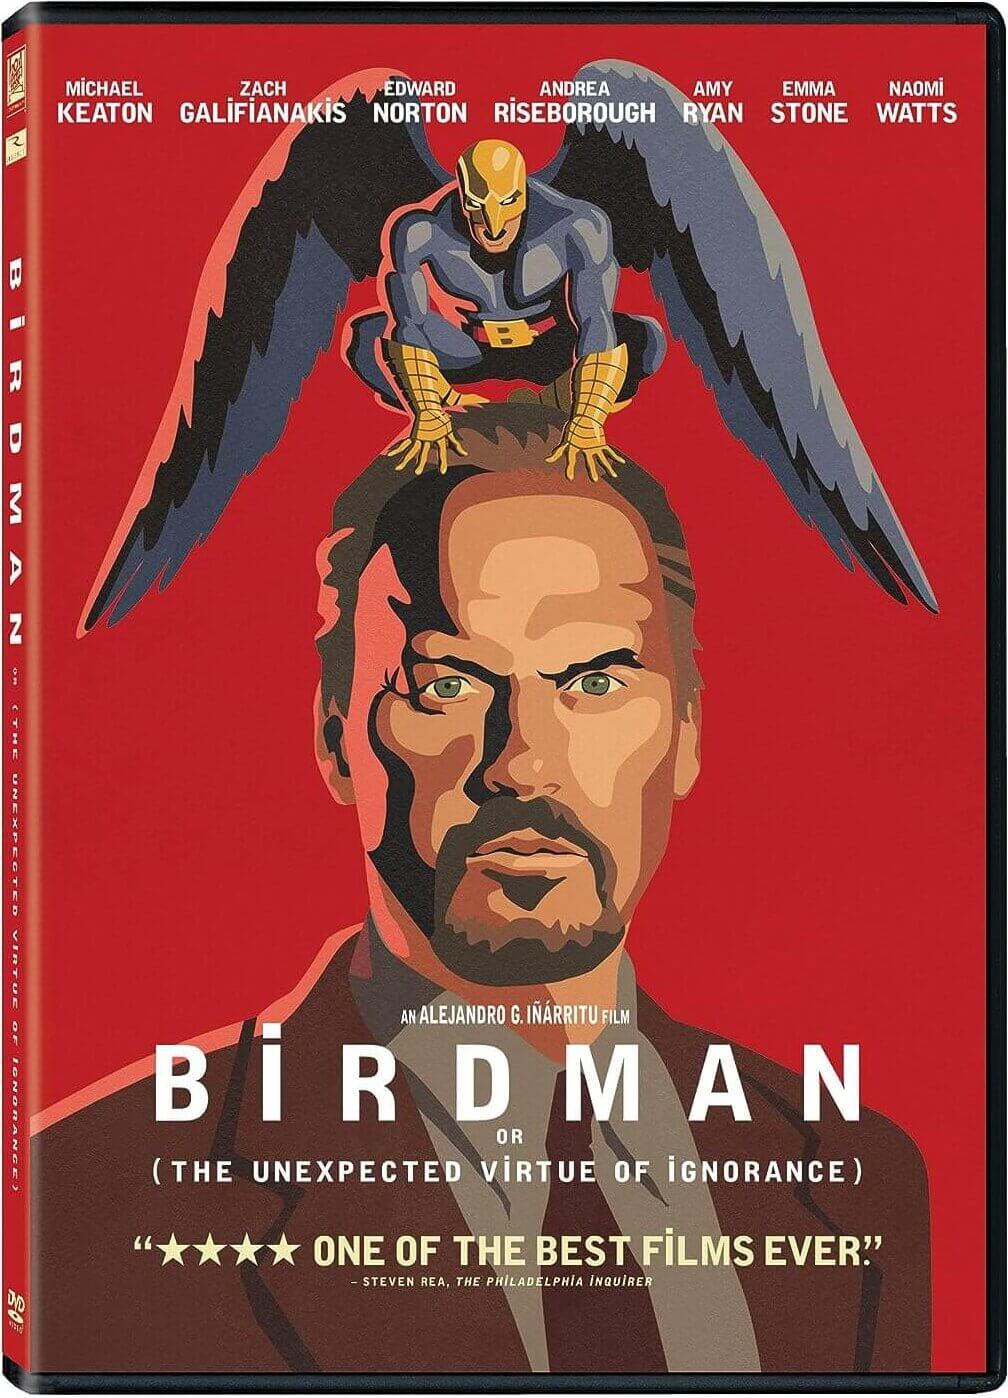 “Birdman or (The Unexpected Virtue of Ignorance)" (2014)